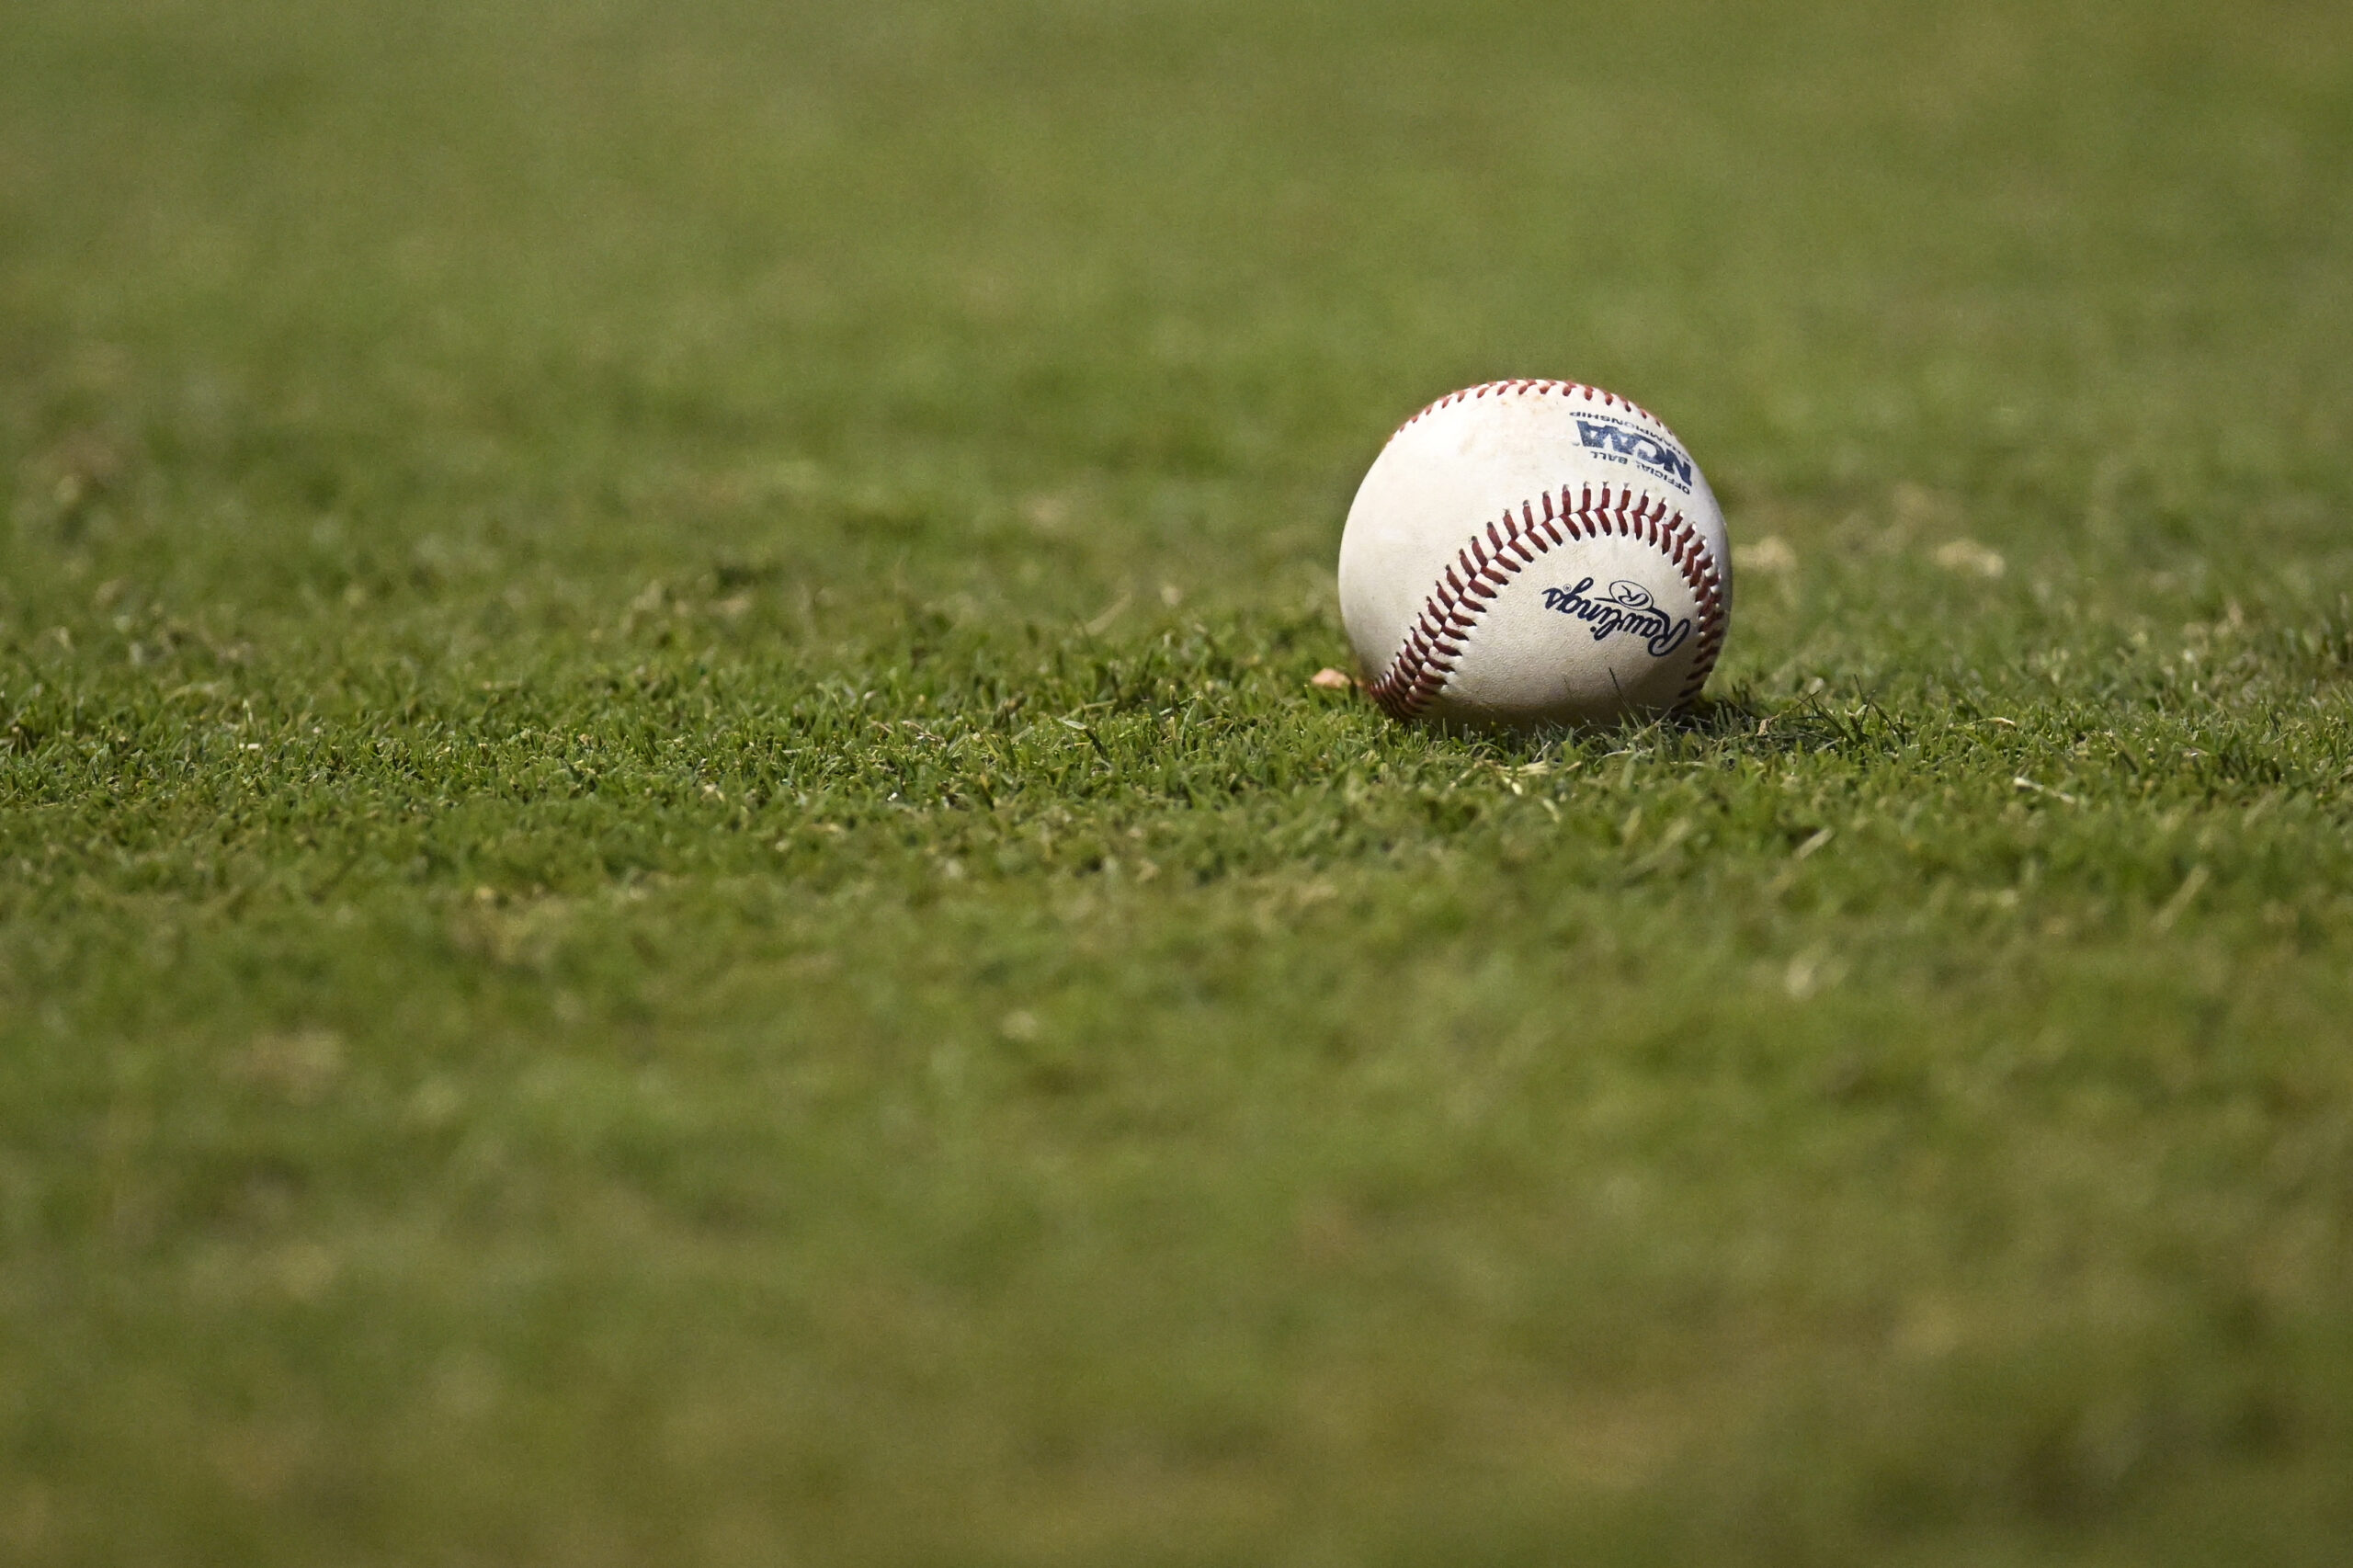 Pitch Count Violation May Determine South Carolina State Baseball Title